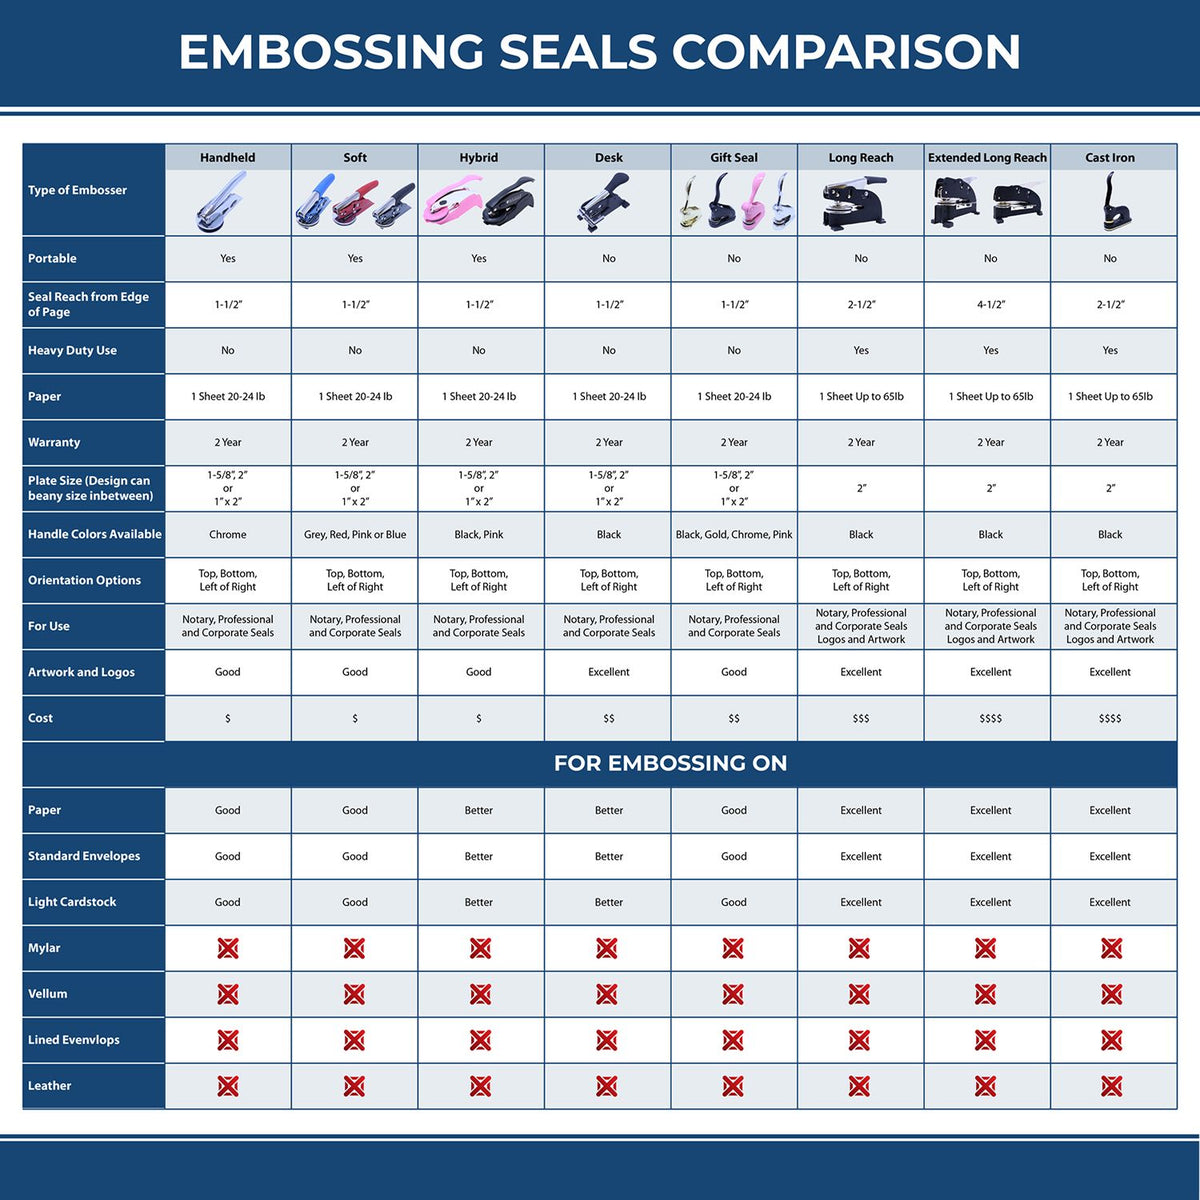 A comparison chart for the different types of mount models available for the Soft North Carolina Professional Geologist Seal